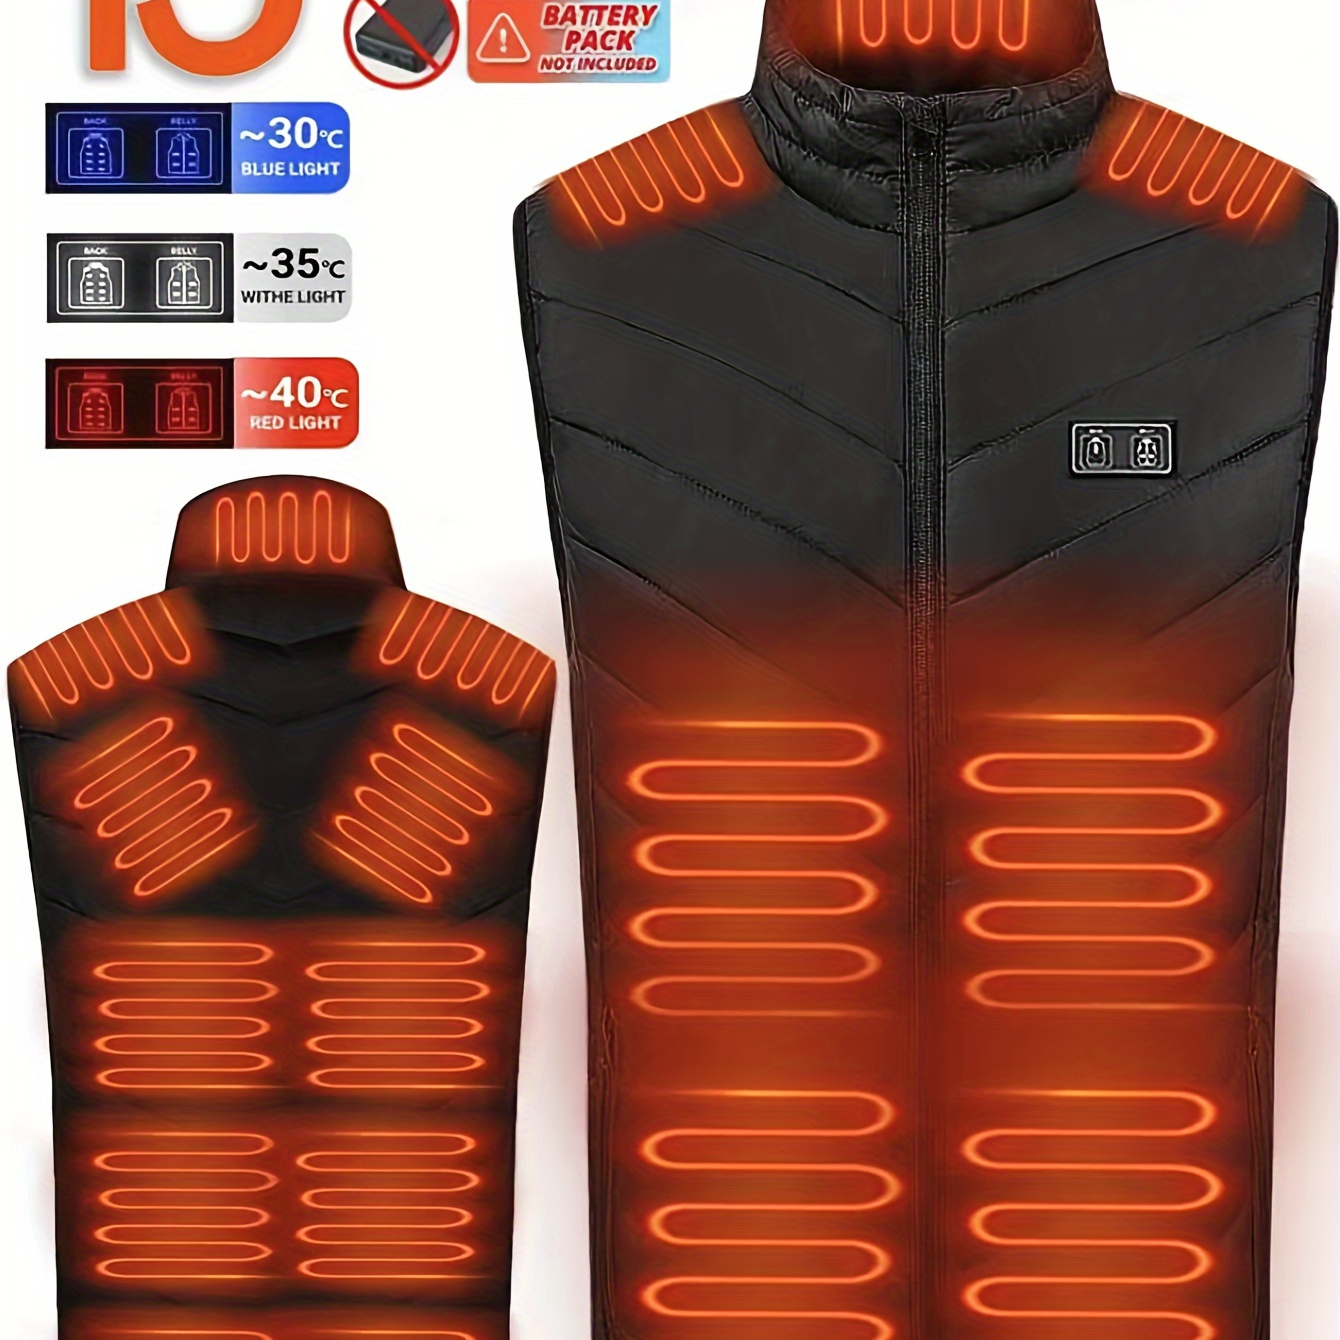 

Men's Usb Rechargeable Solid Heated Vest, Smart Electric Heating Jacket With Adjustable Temperature Control, Winter Outdoor Warmth Gear